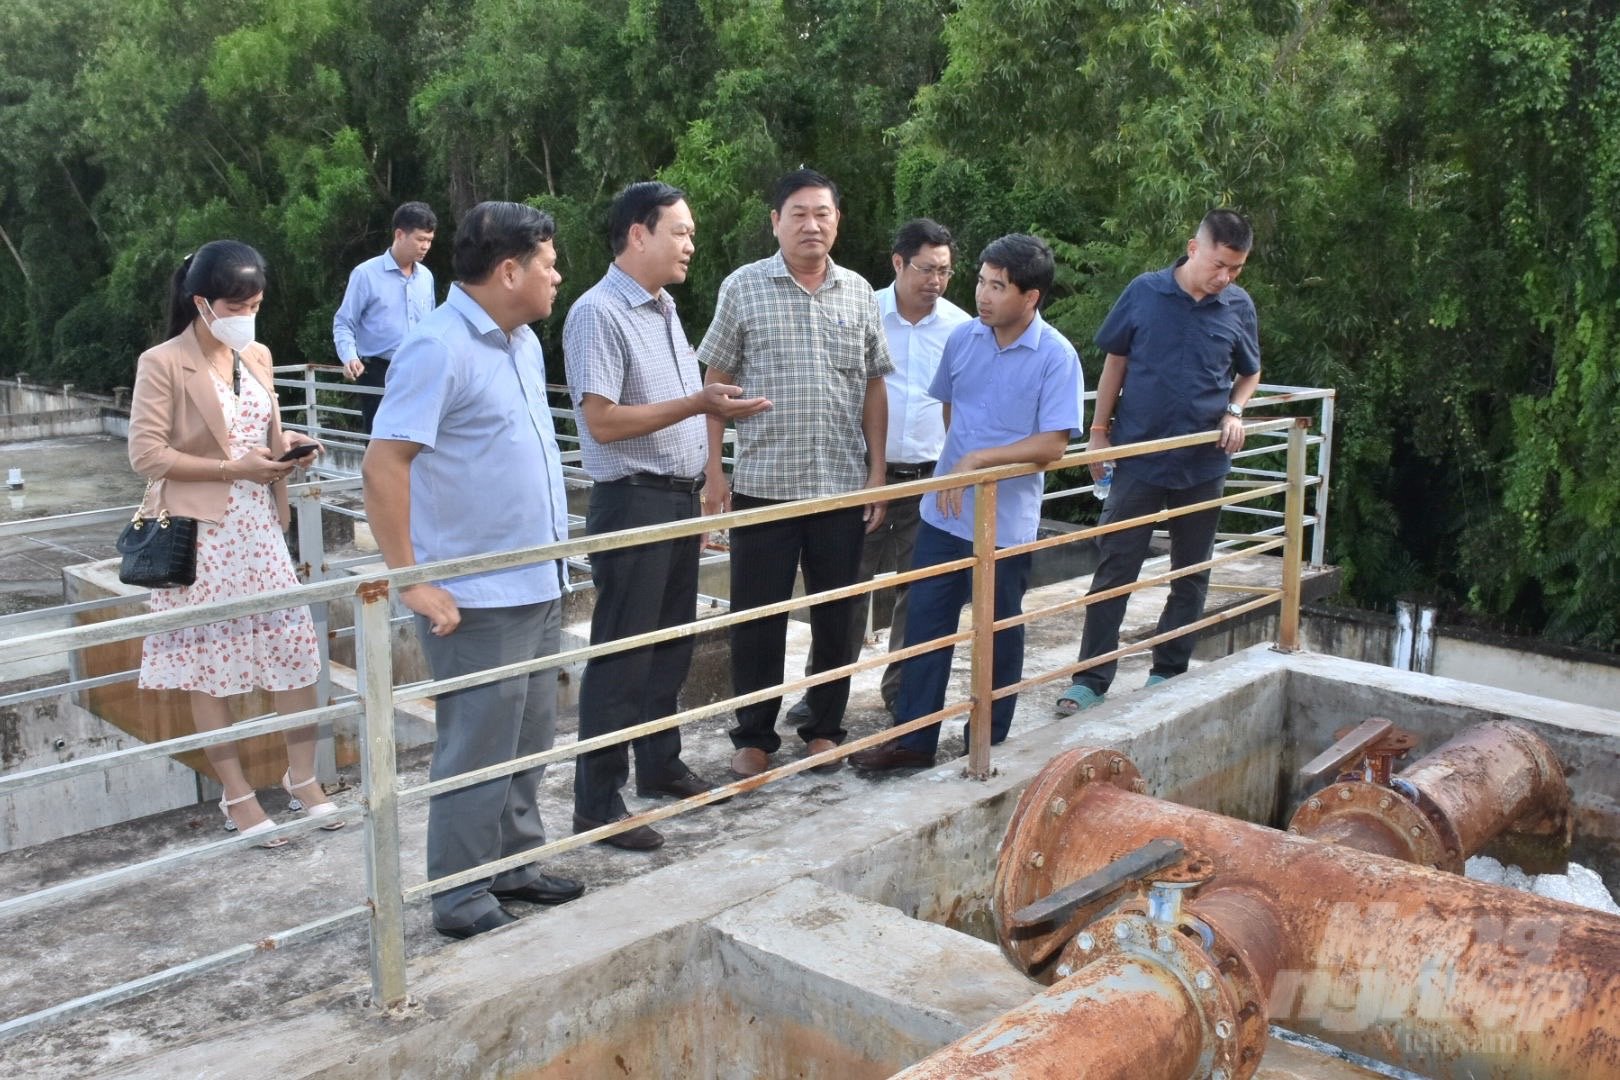 The Department of Water Resources inspecting the domestic water source in Phuoc Long district, Bac Lieu province. Photo: Trong Linh.